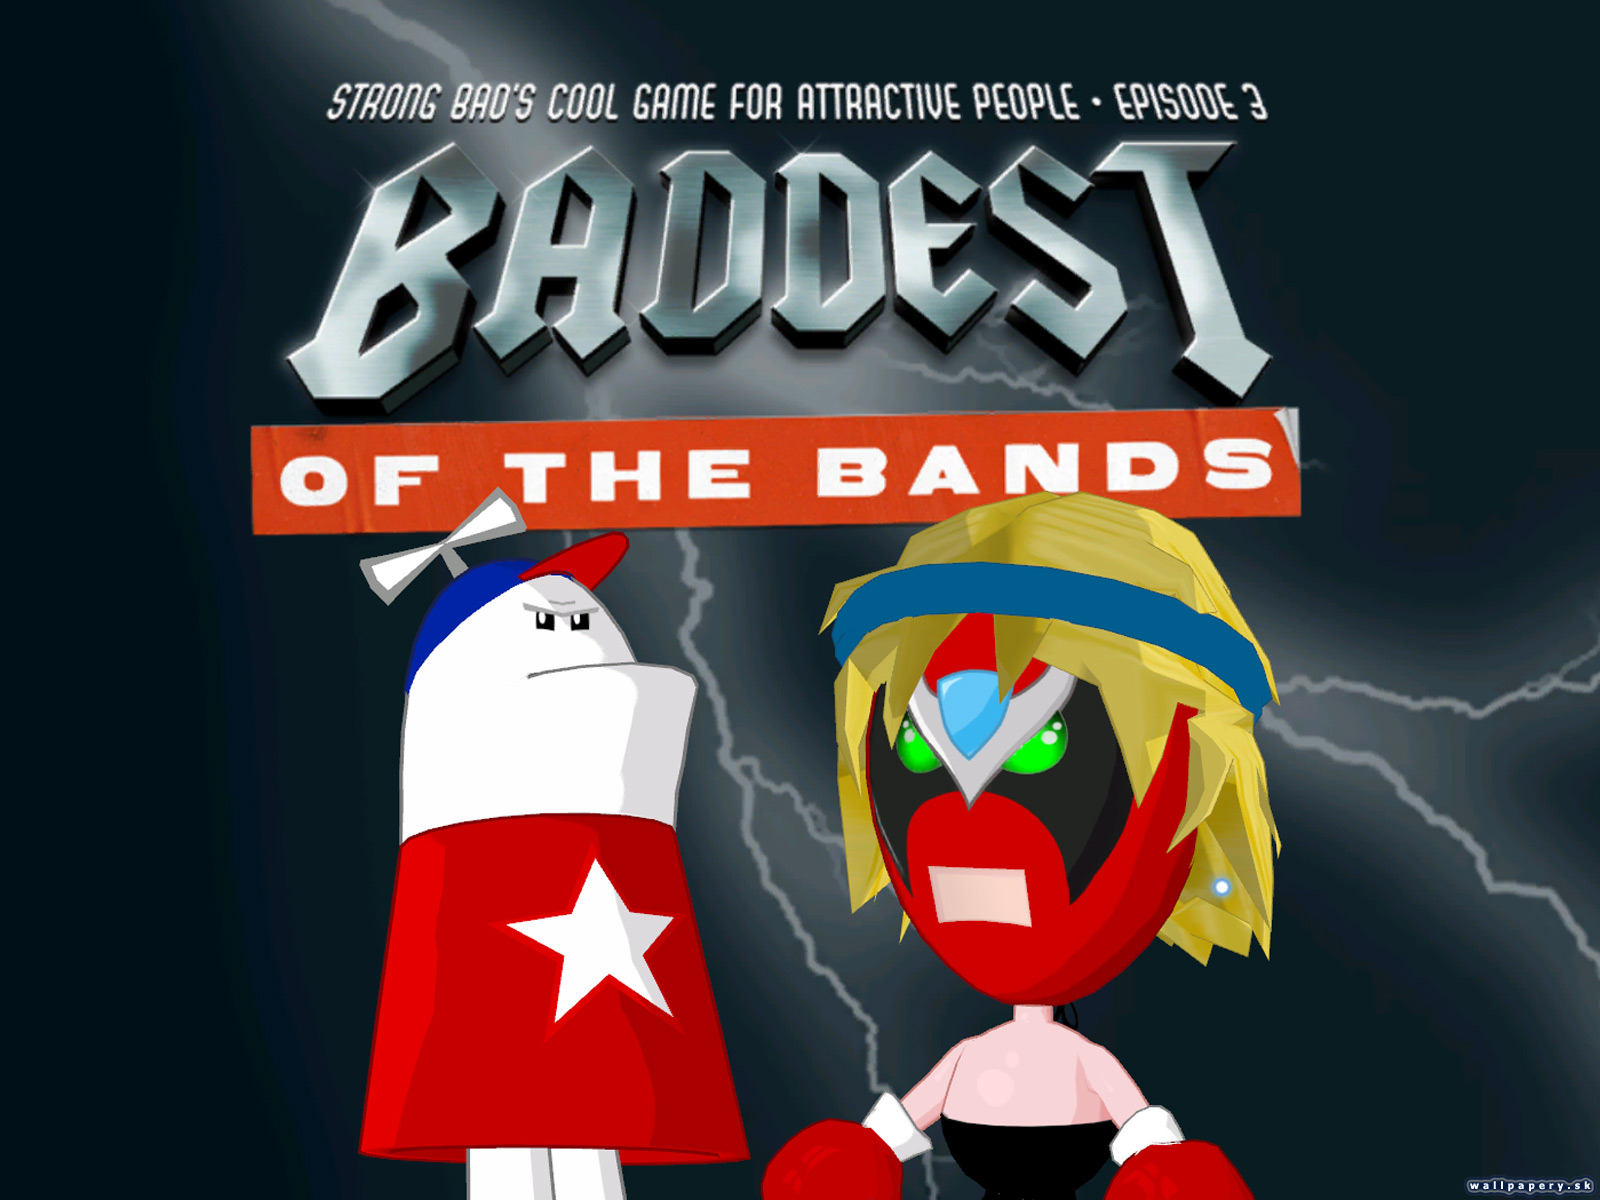 Strong Bad's Episode 3: Baddest of the Bands - wallpaper 1